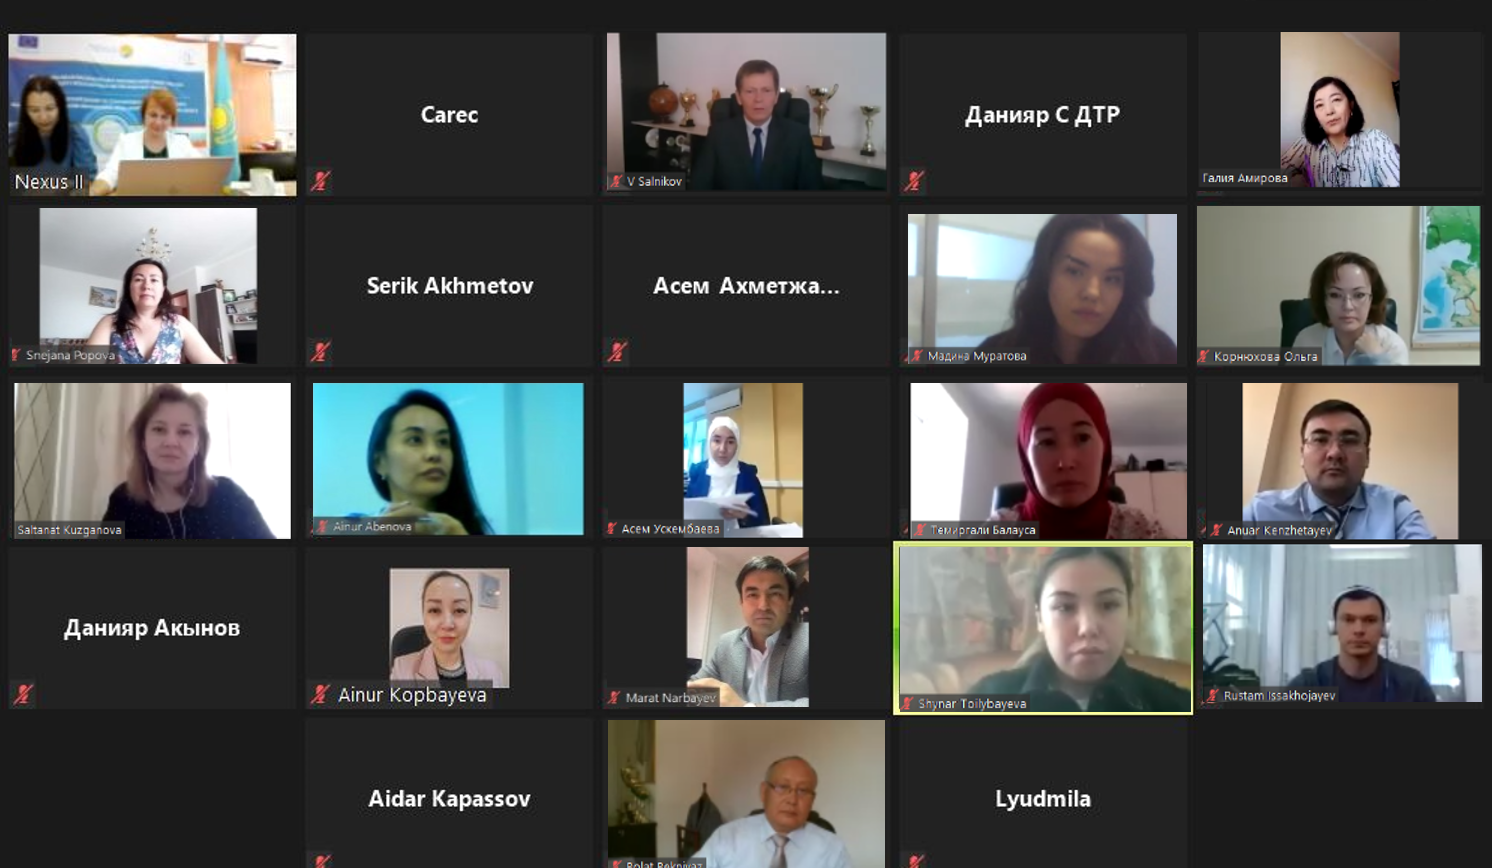 The EU-funded “Central Asia Nexus Dialogue Project” held an online meeting with relevant stakeholders to inform about its plans for the second phase.